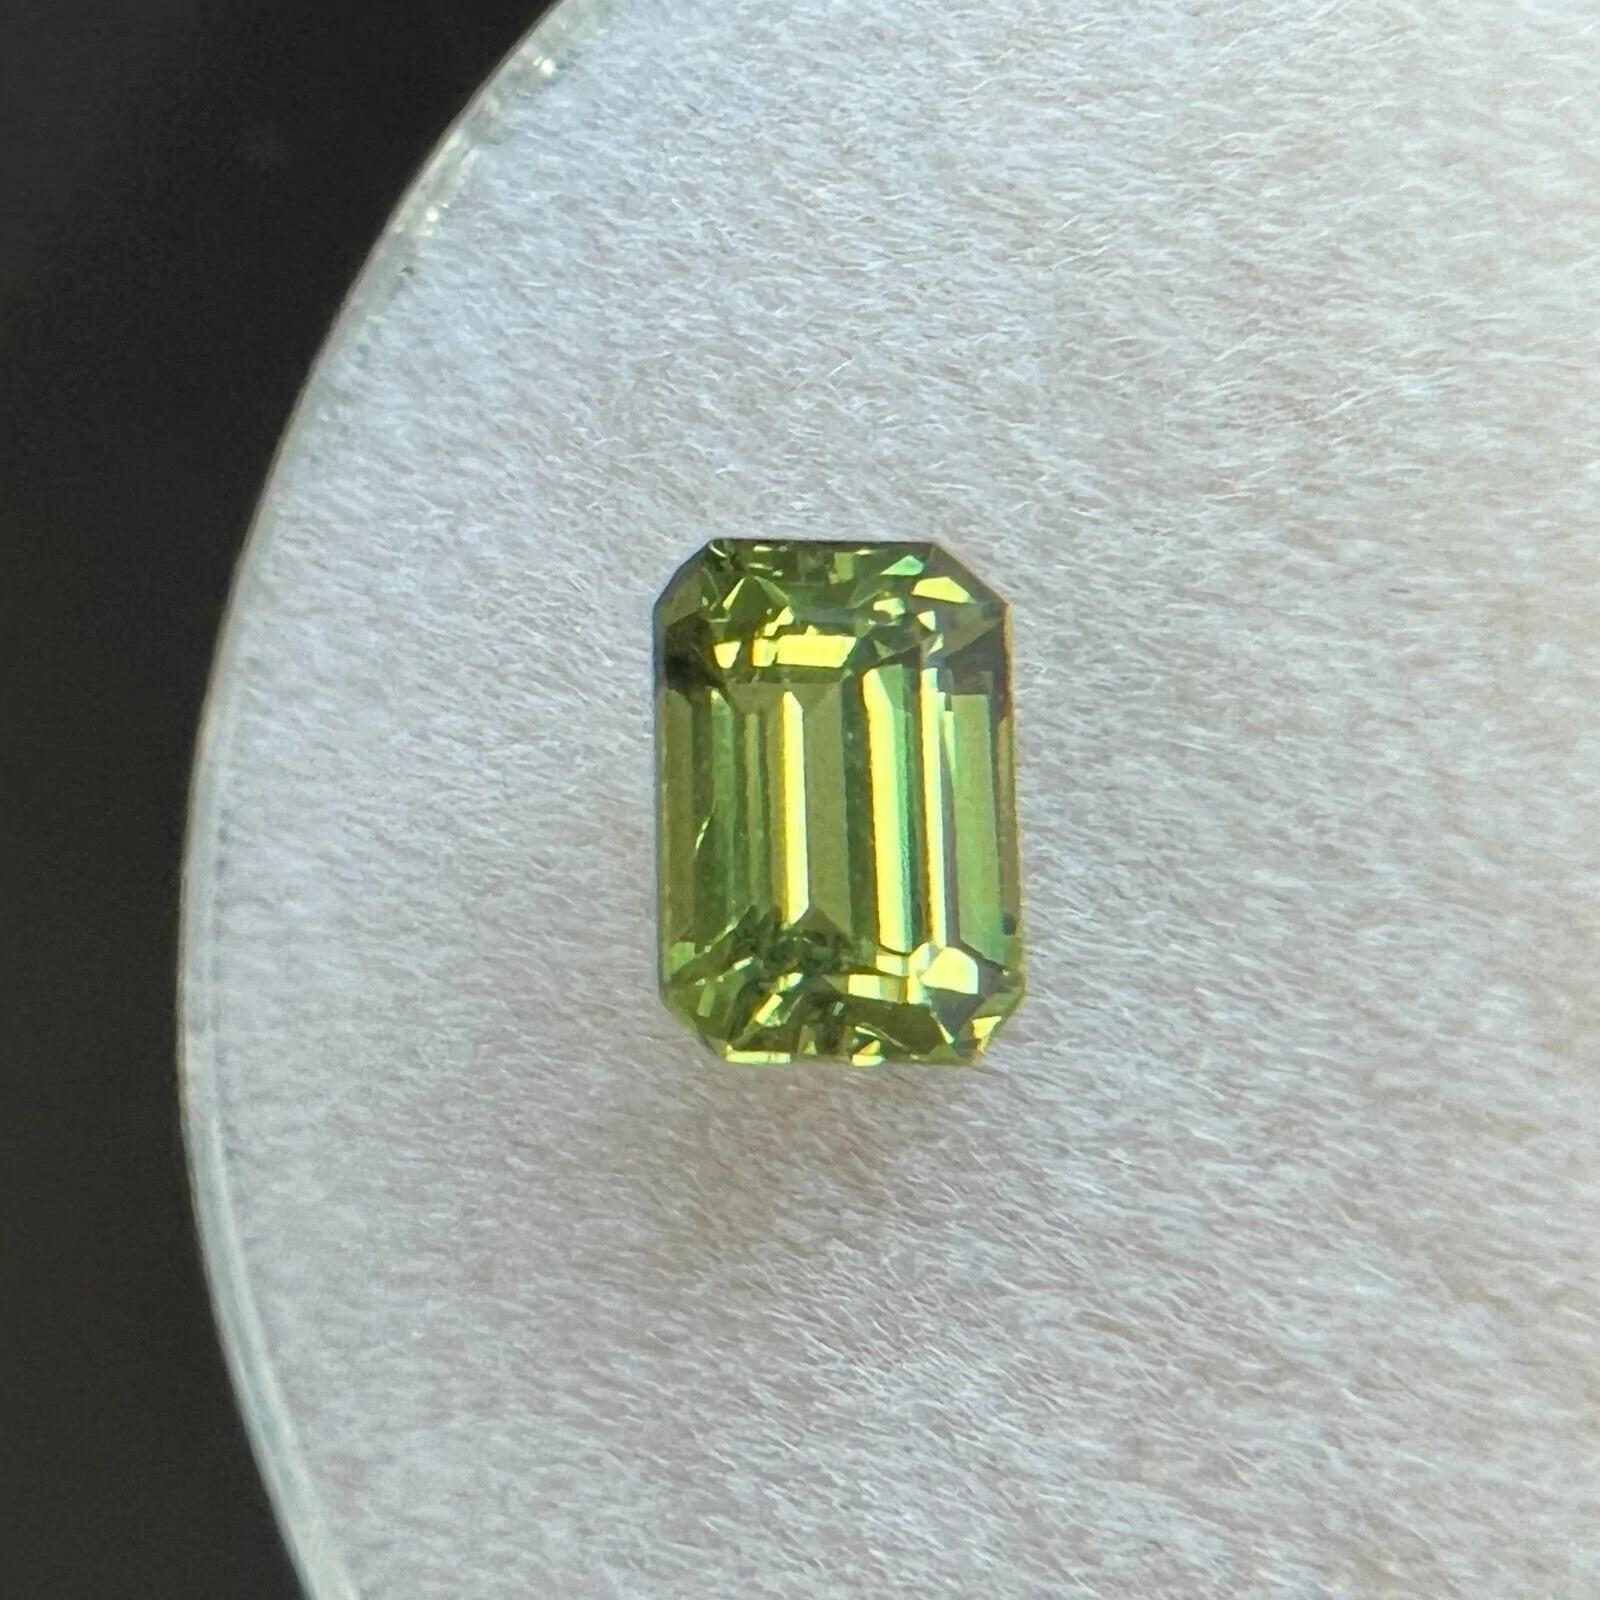 GIA Certified 1.01 Untreated Vivid Green Yellow Sapphire Emerald Octagon Cut Gem For Sale 1